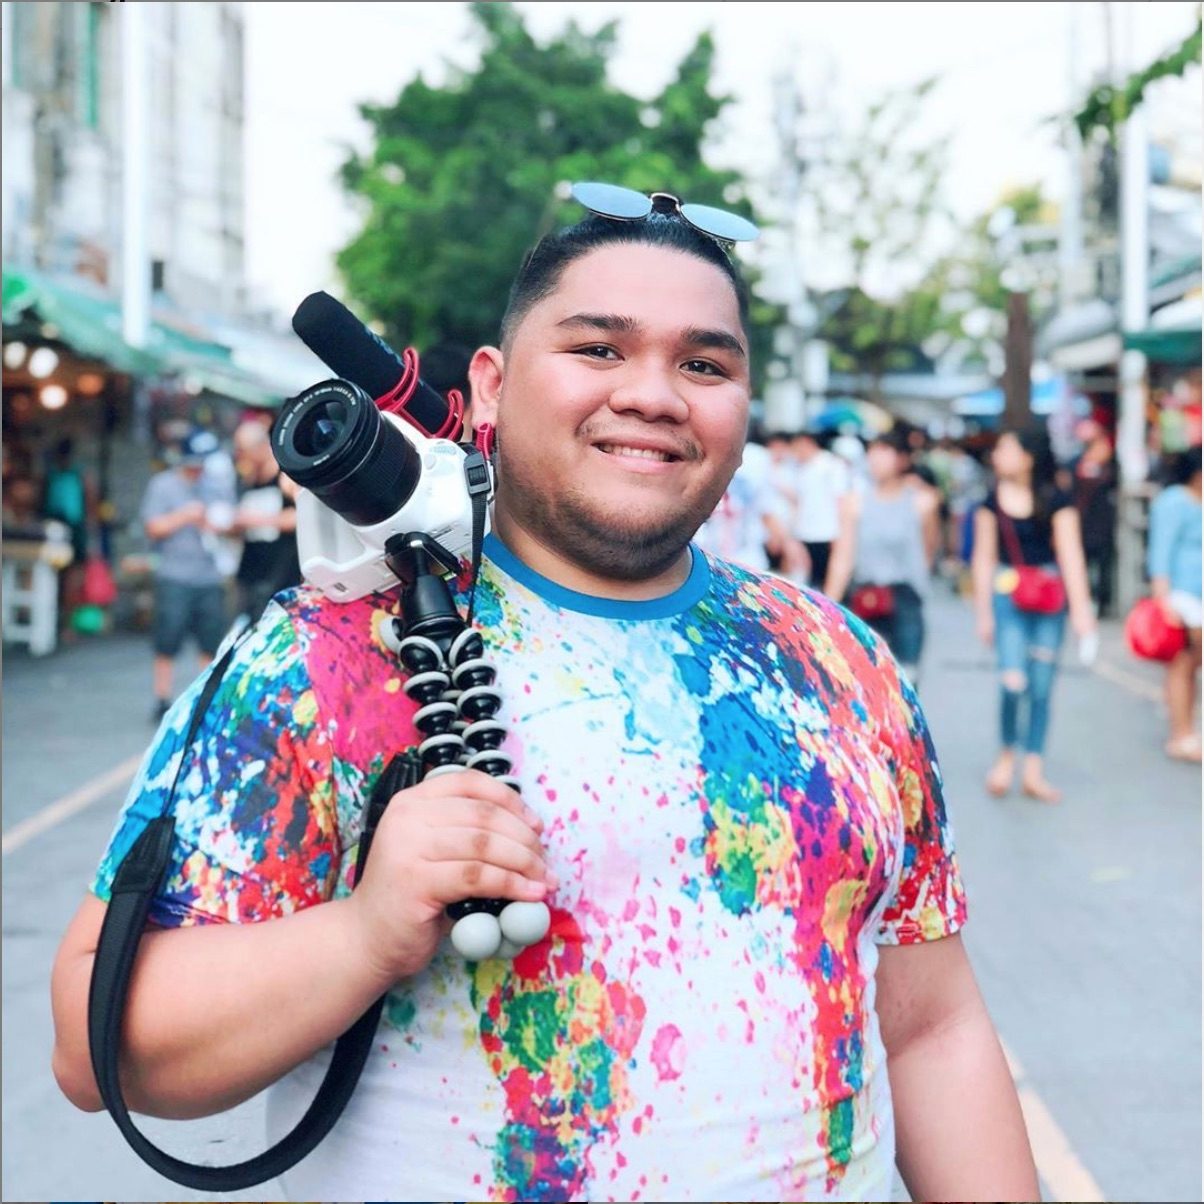 YouTube’s ‘Kween LC’: What to know about Lloyd Cadena’s life and legacy